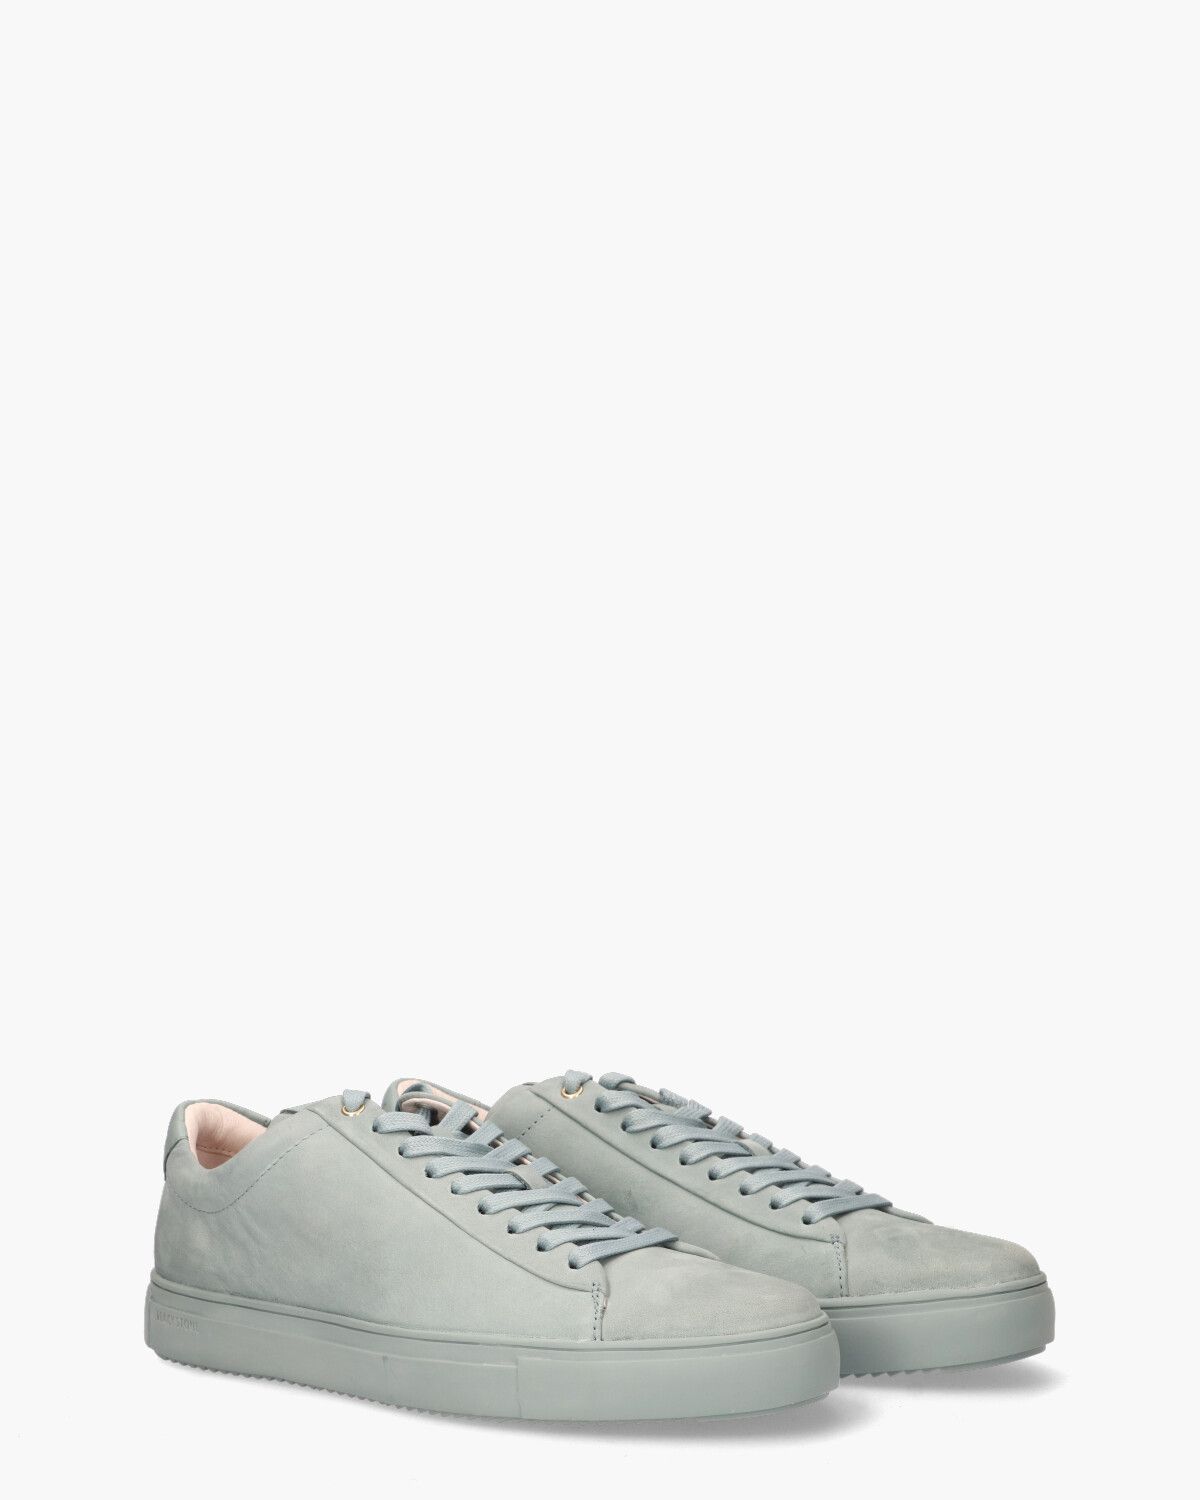 RM51 Lichtblauw Herensneakers